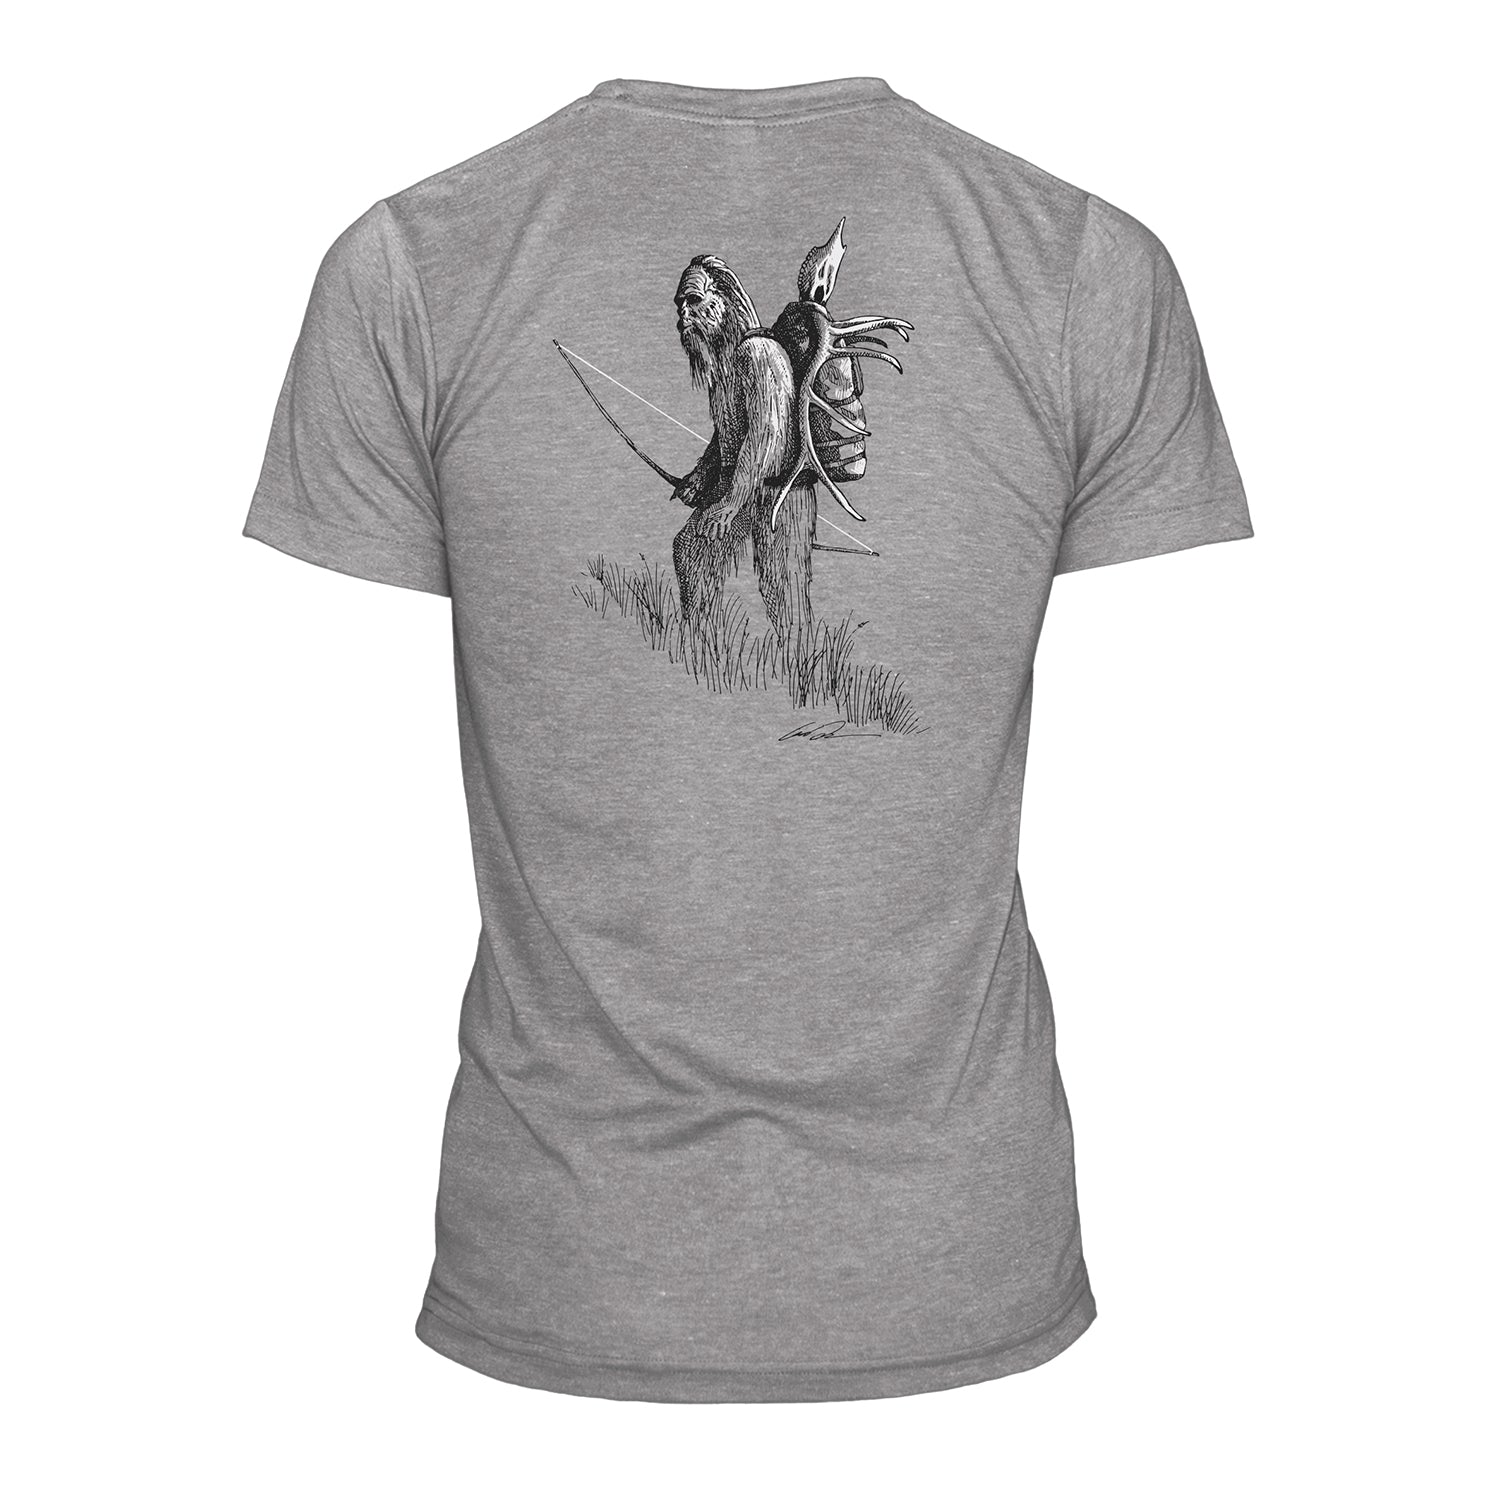 The back of a gray short sleeved tee shirt has a sasquatch carrying a bow and wearing a backpack with an elk skull on it